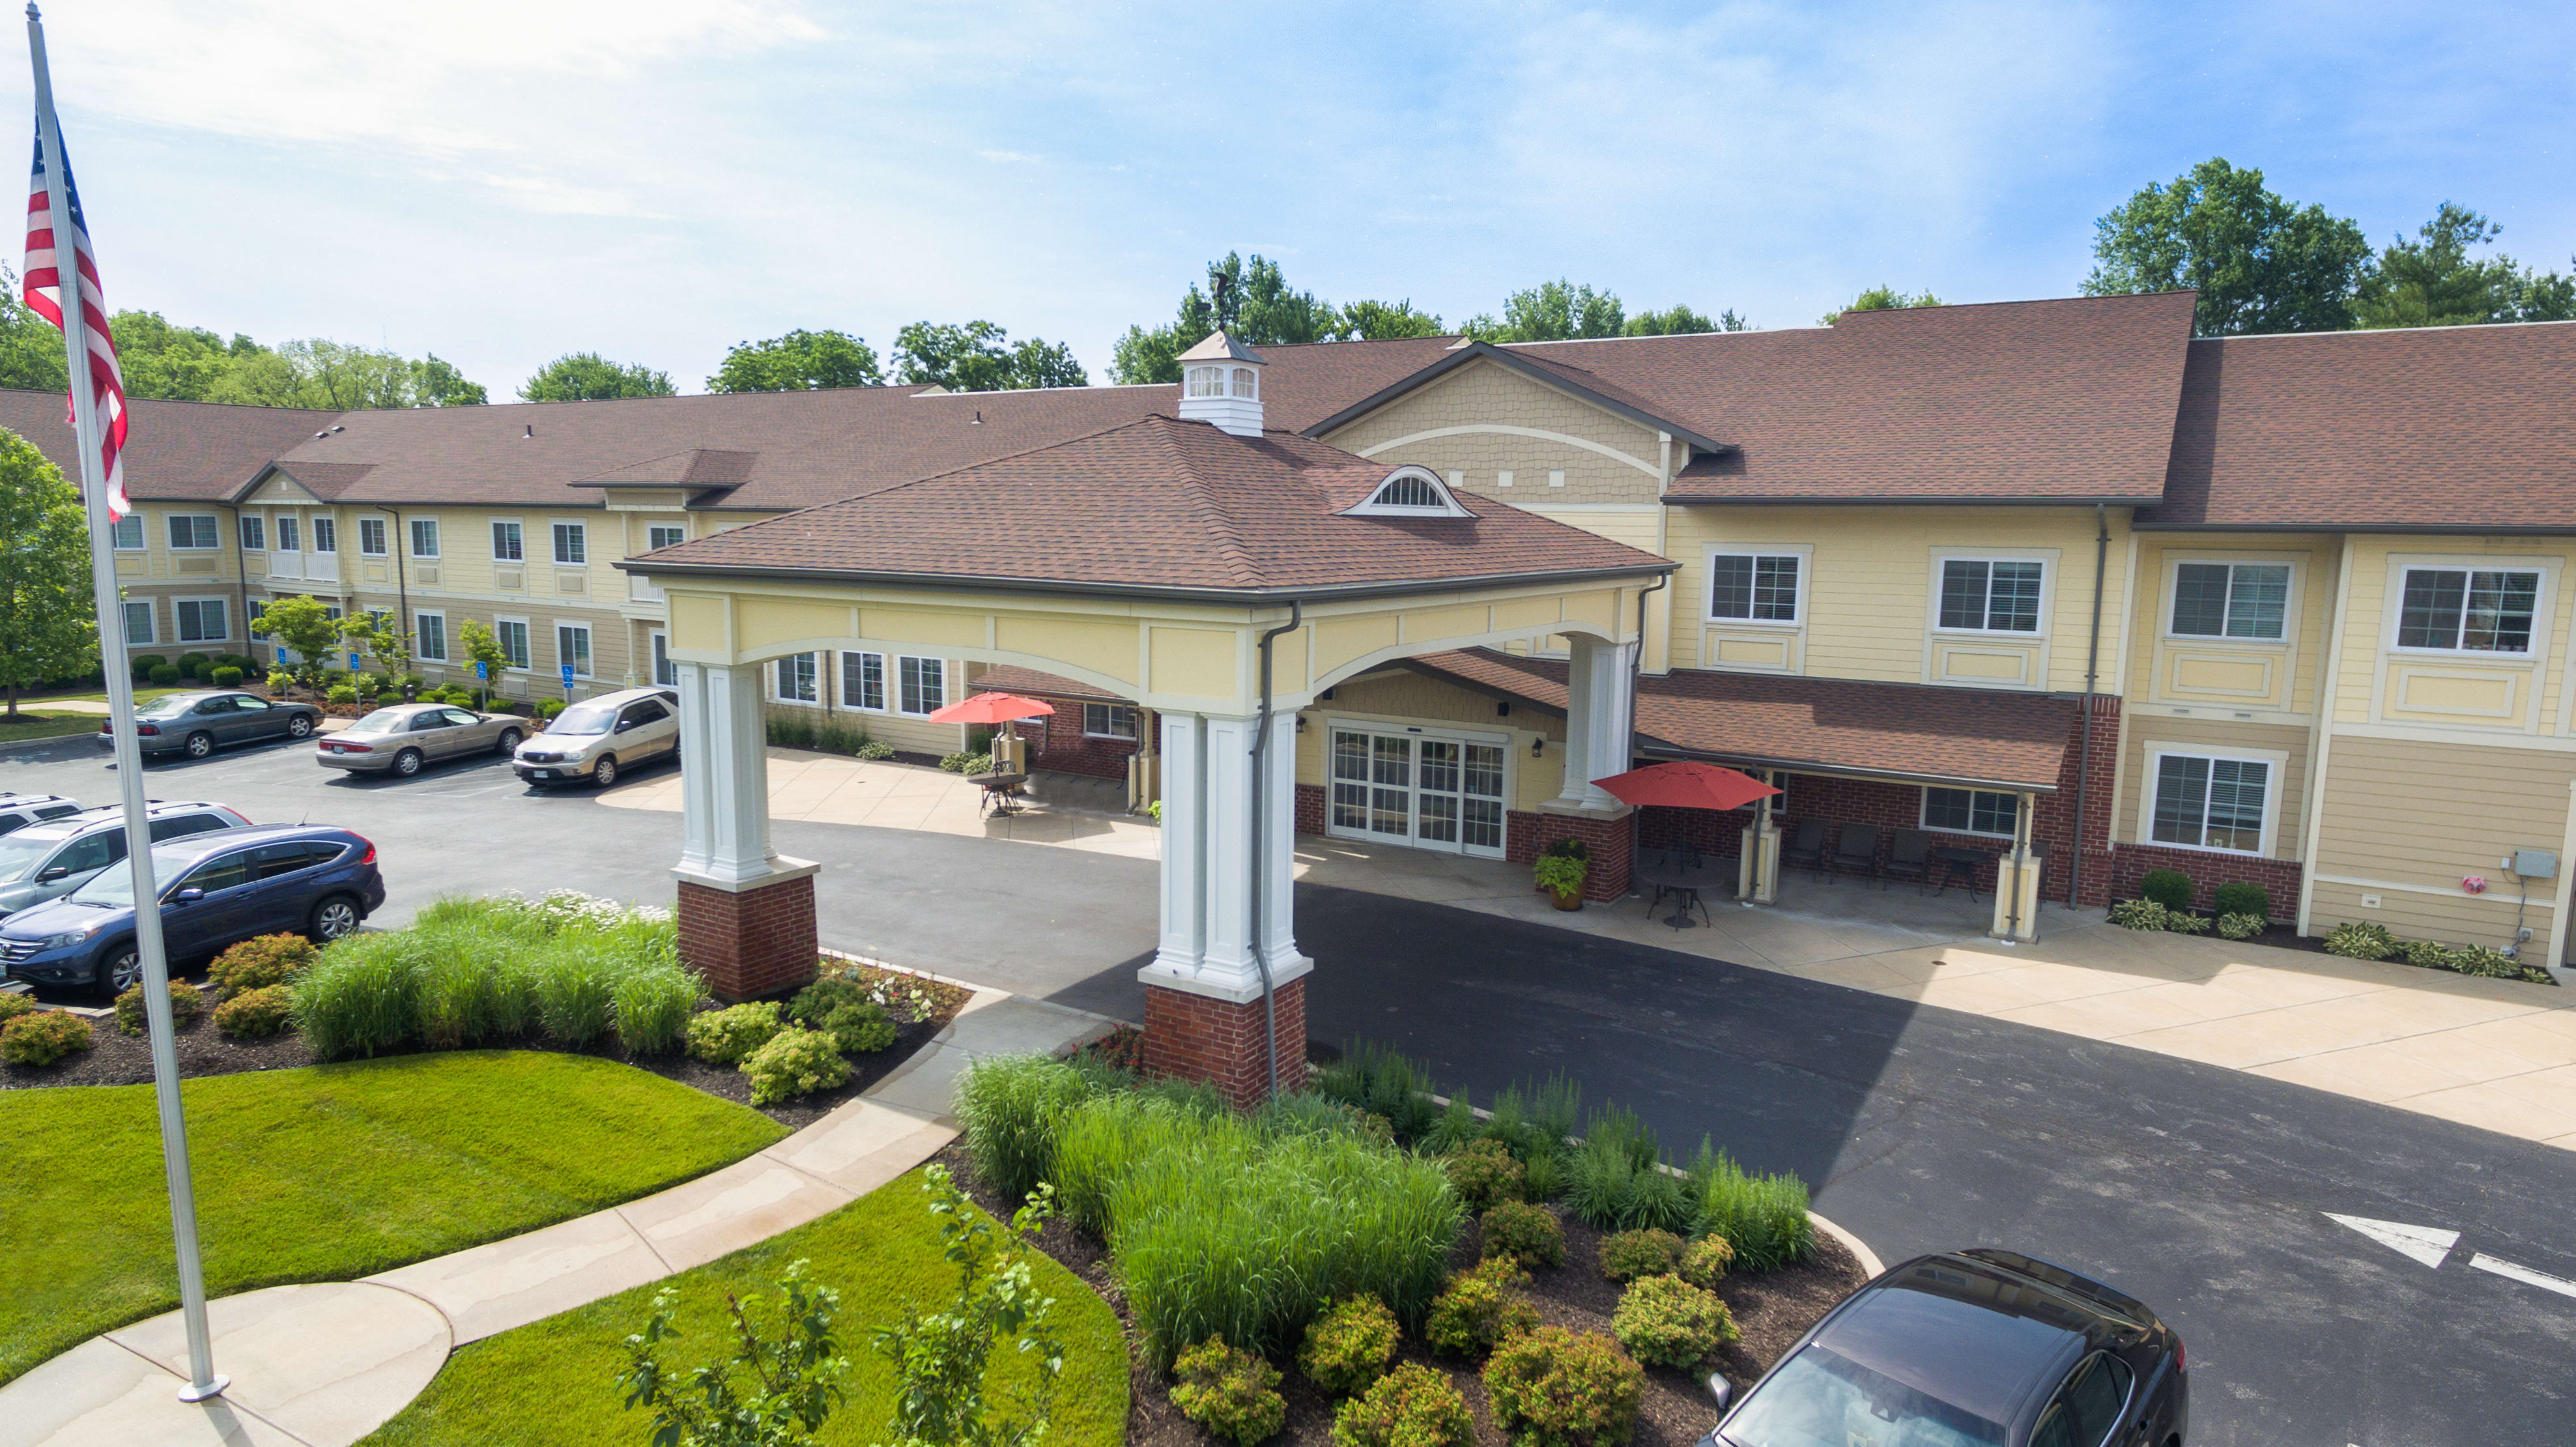 Southview Assisted Living & Memory Care aerial view of community